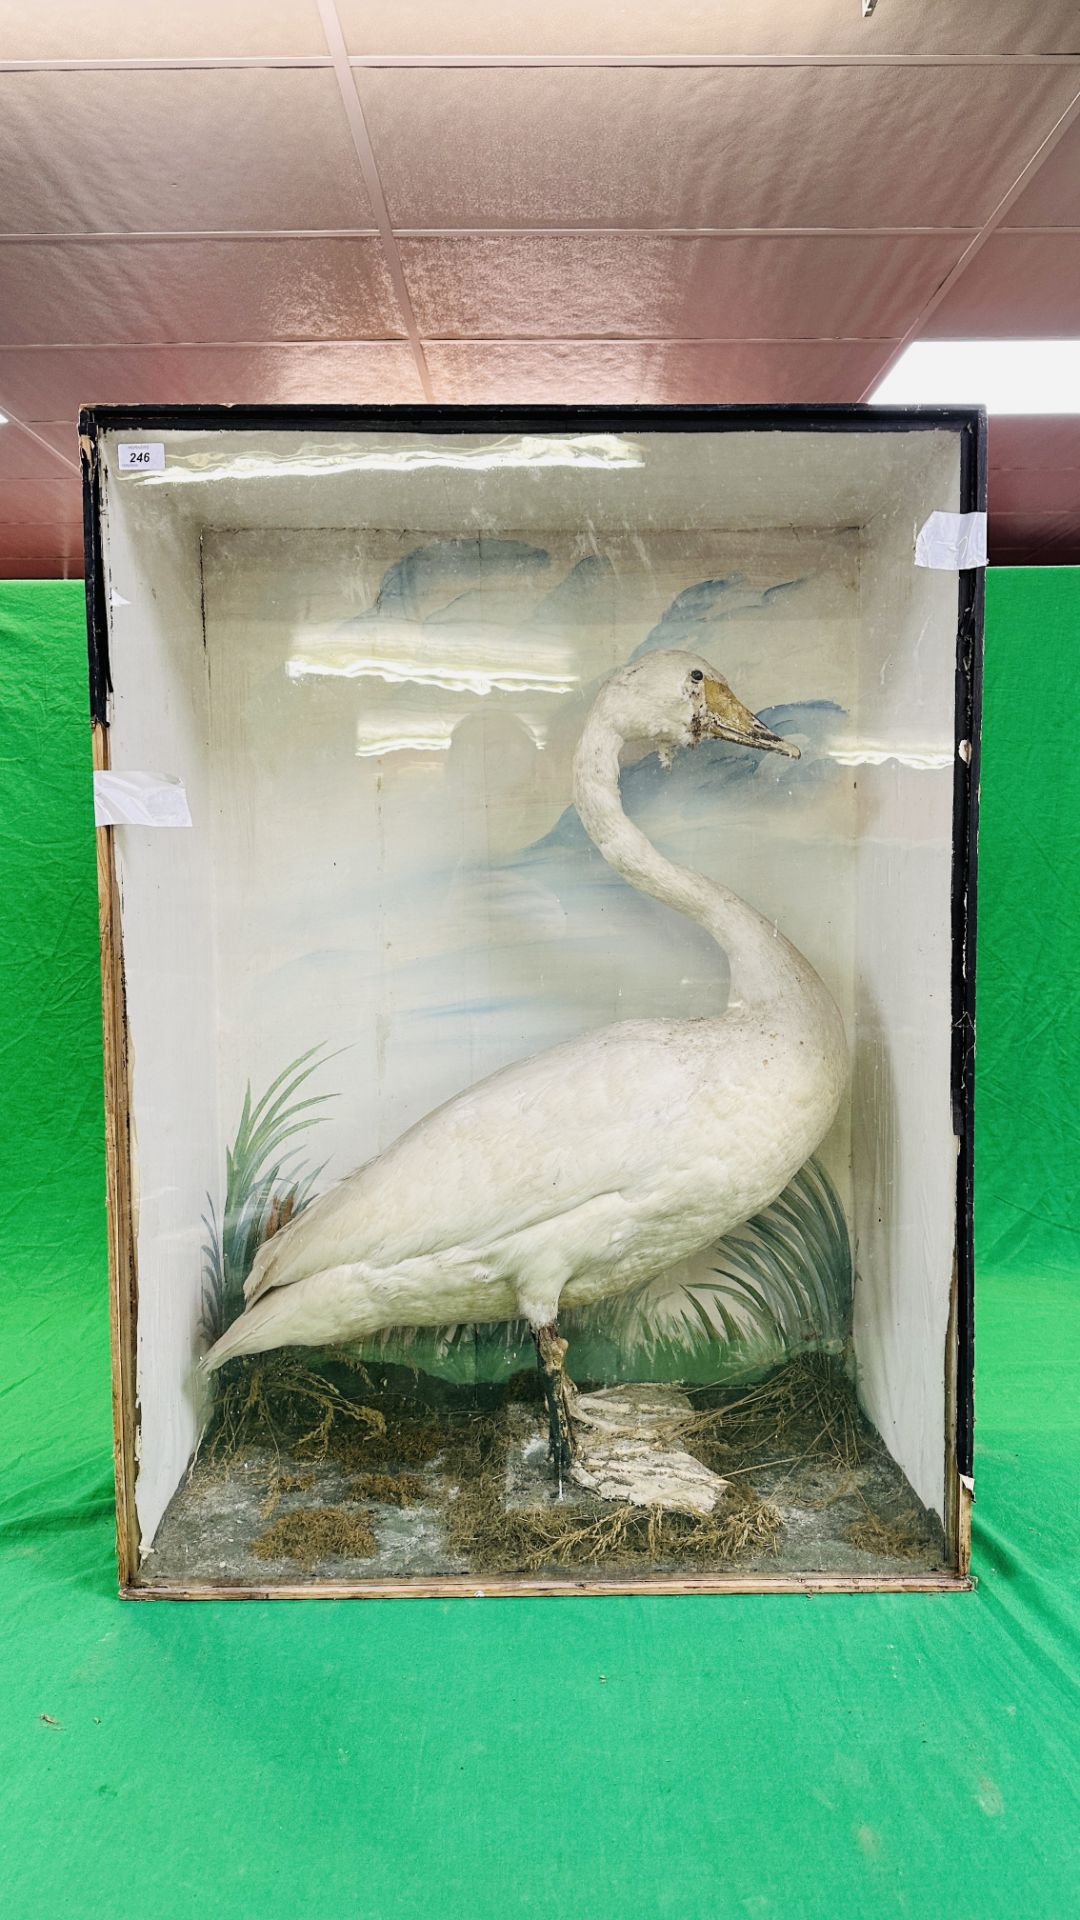 A VICTORIAN CASED TAXIDERMY STUDY OF A SWAN,